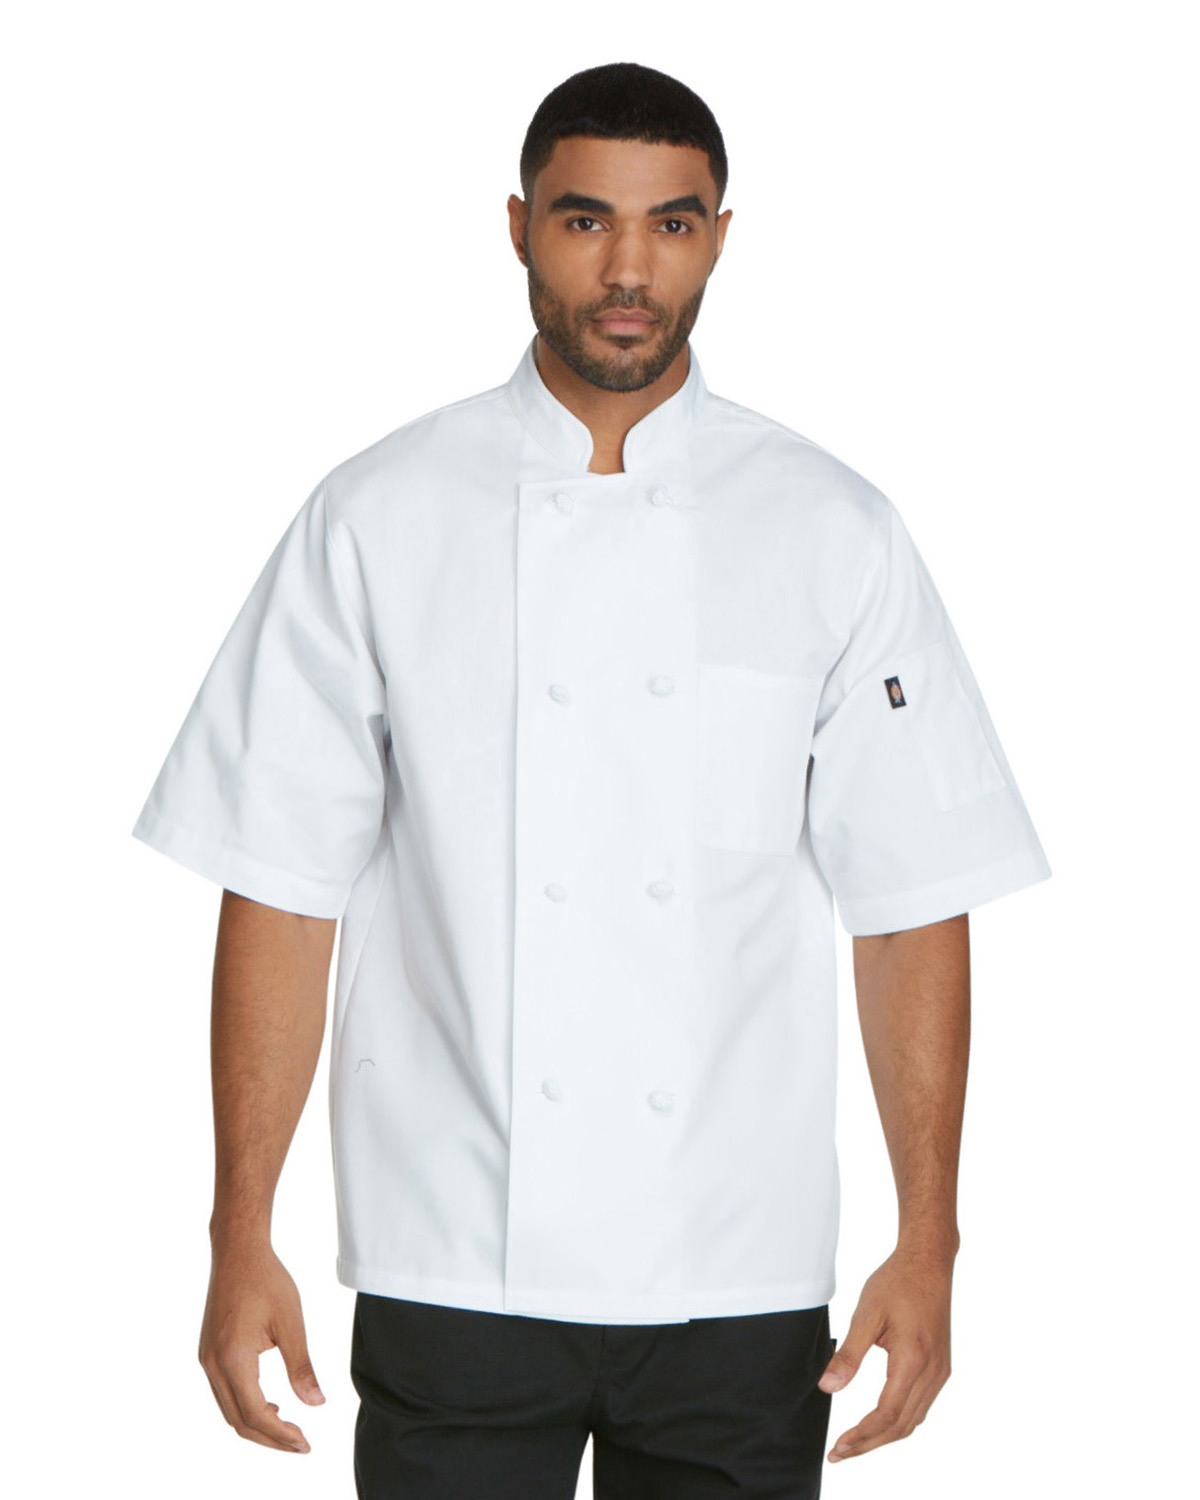 DC48 Dickies Chef Unisex Classic Knot Button Short Sleeve Chef Coat